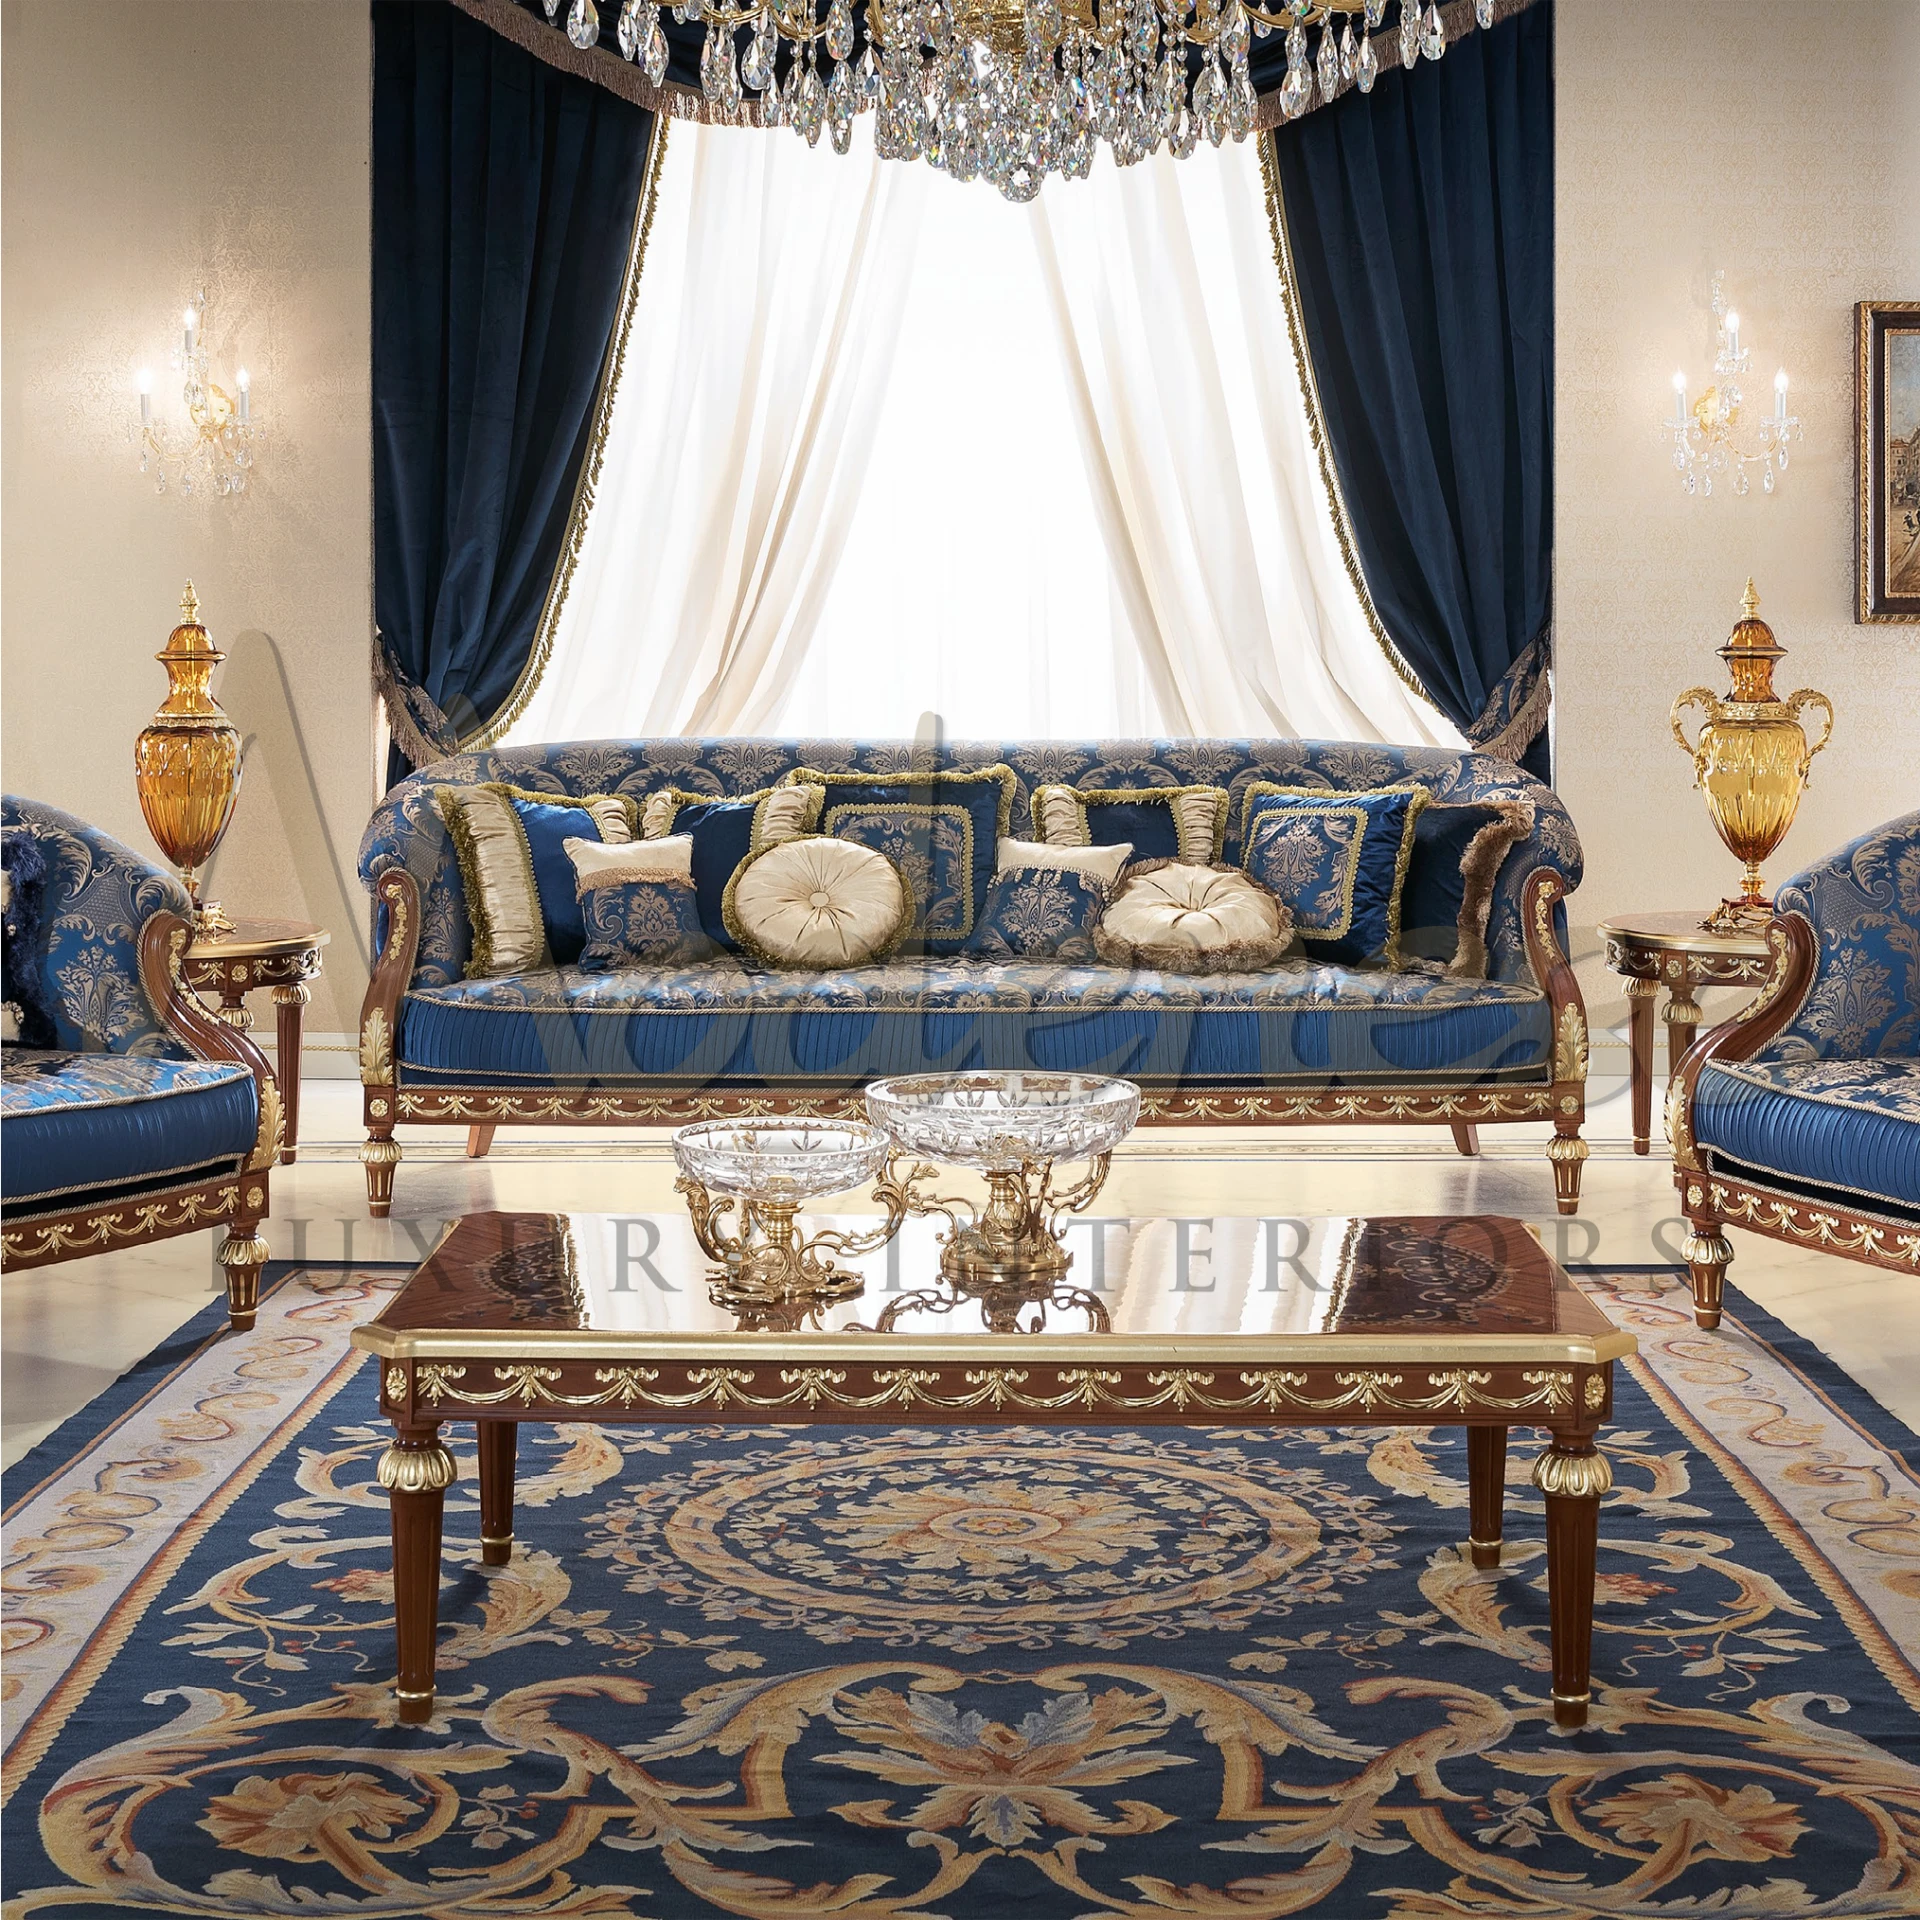 Luxurious Royal Blue Pillow with bold design and embellished details, reflecting the grandeur of classical Italian textiles.